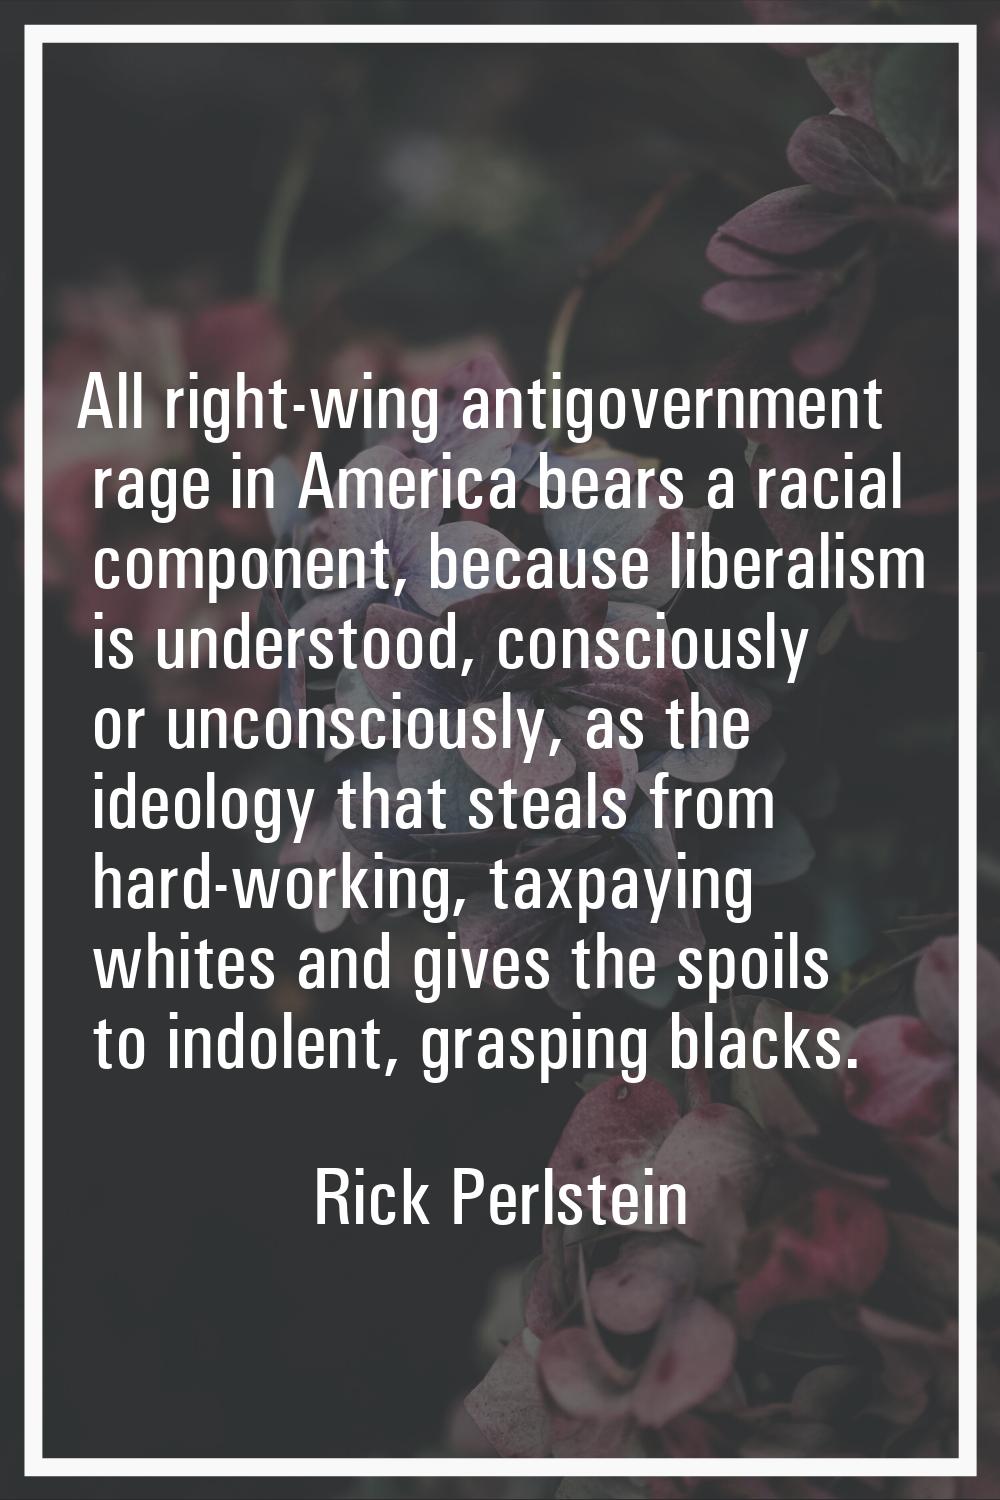 All right-wing antigovernment rage in America bears a racial component, because liberalism is under